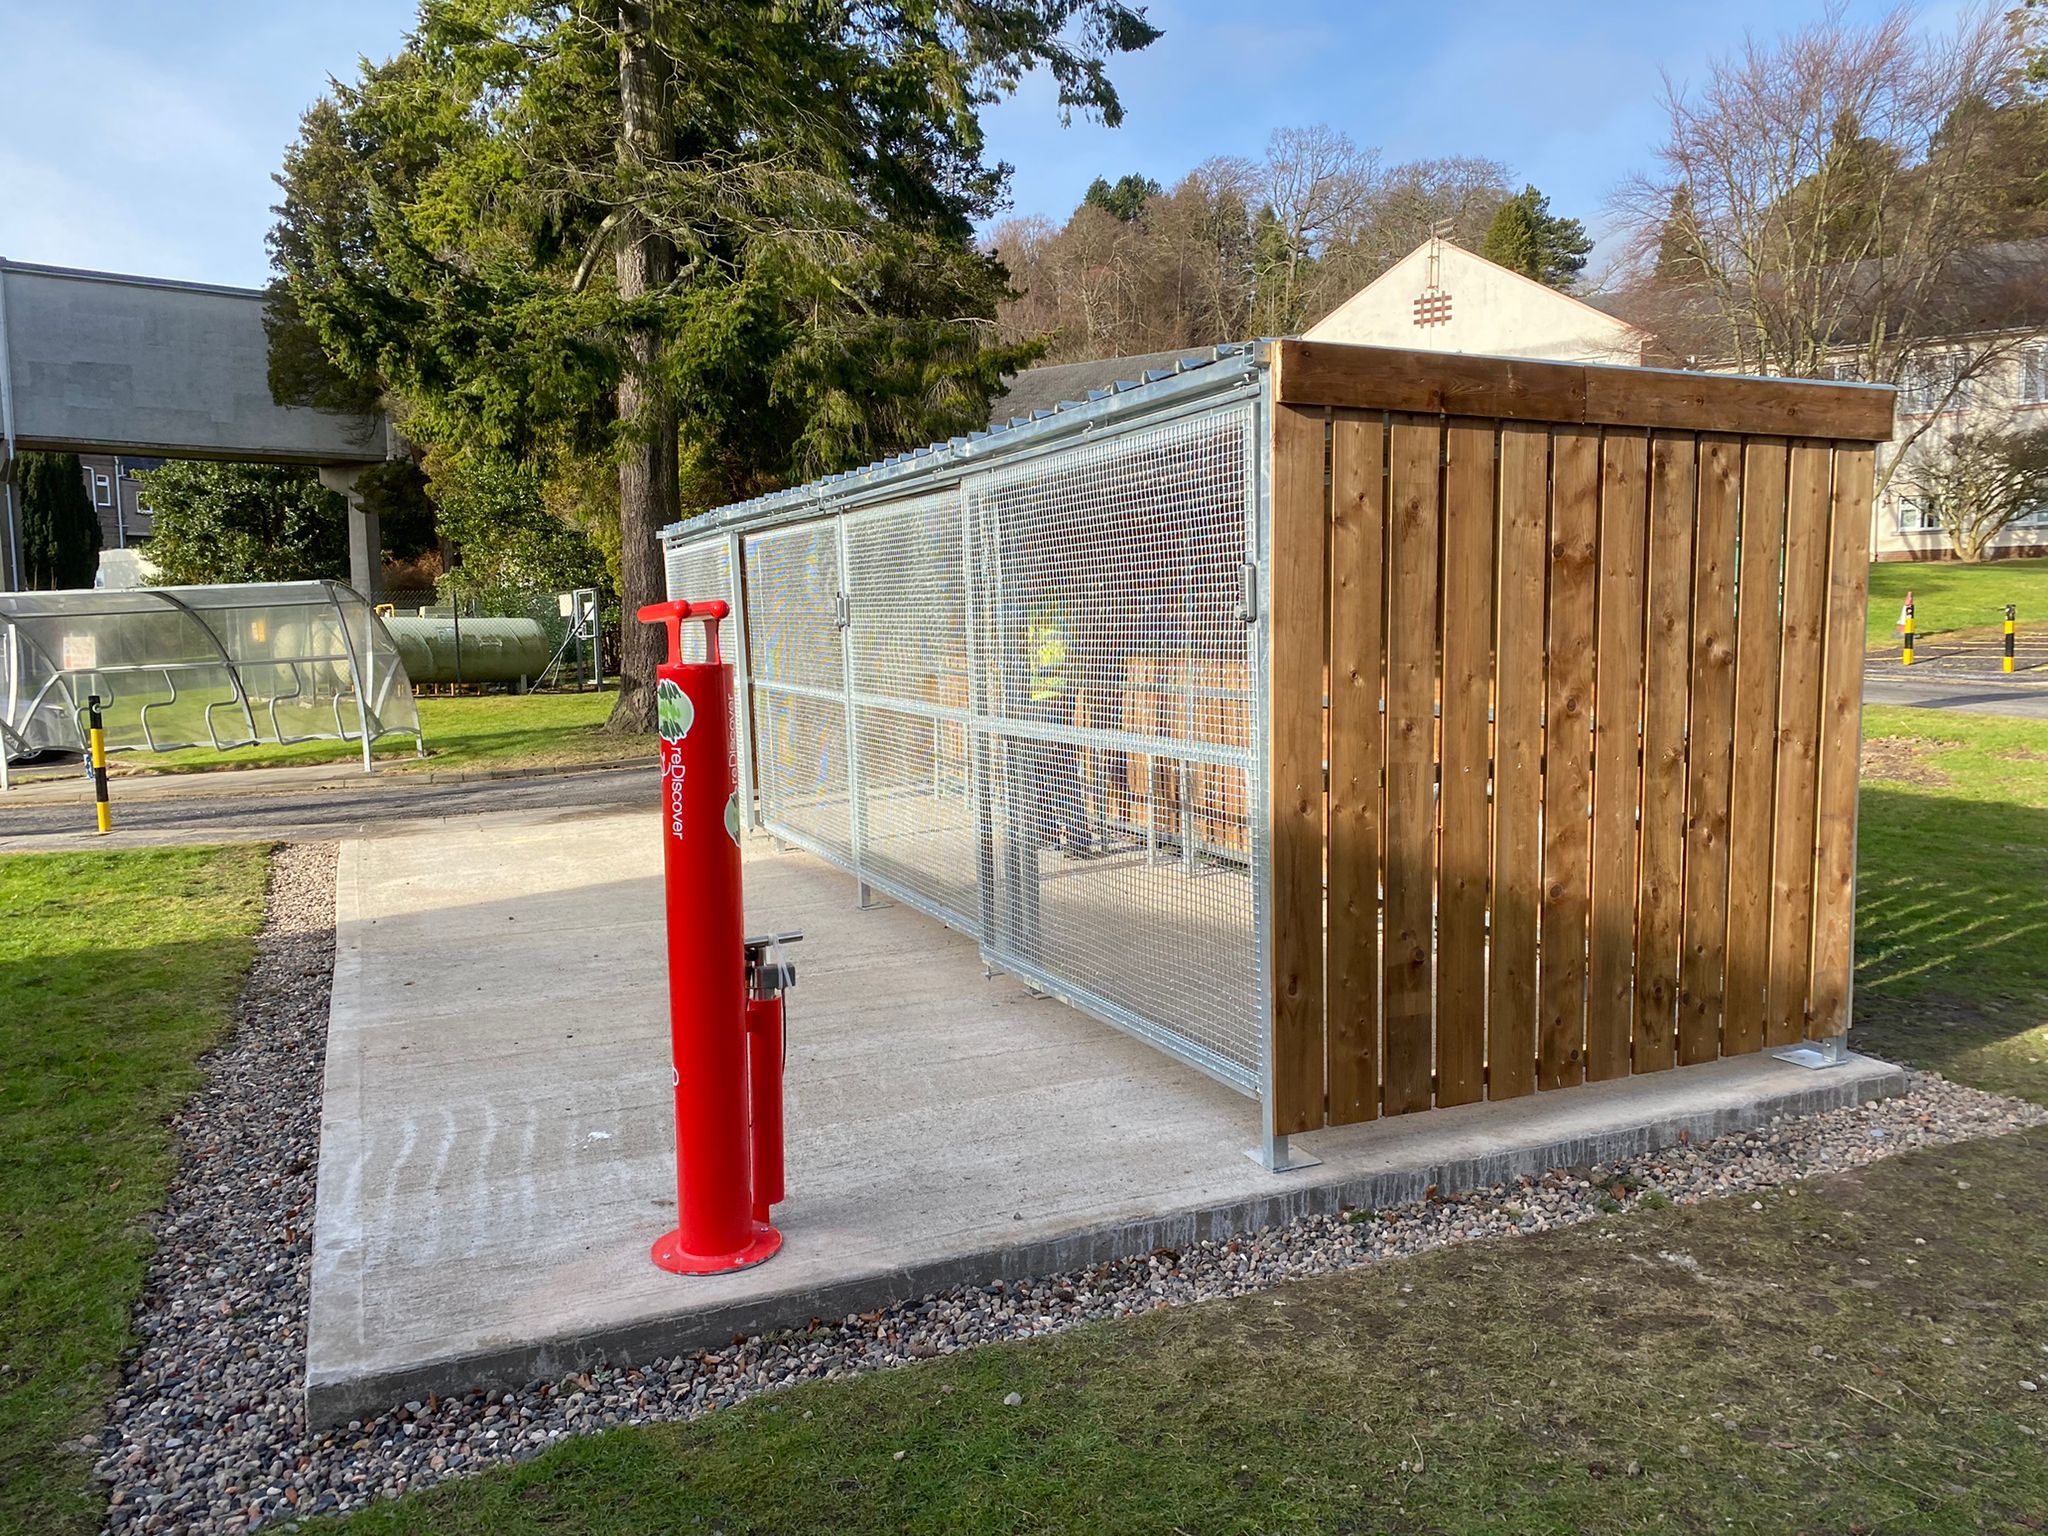 Secure Cycle Store's Trinity timber bike shelter, installed outdoors for the public and staff of NHS Royal Victoria hospital.